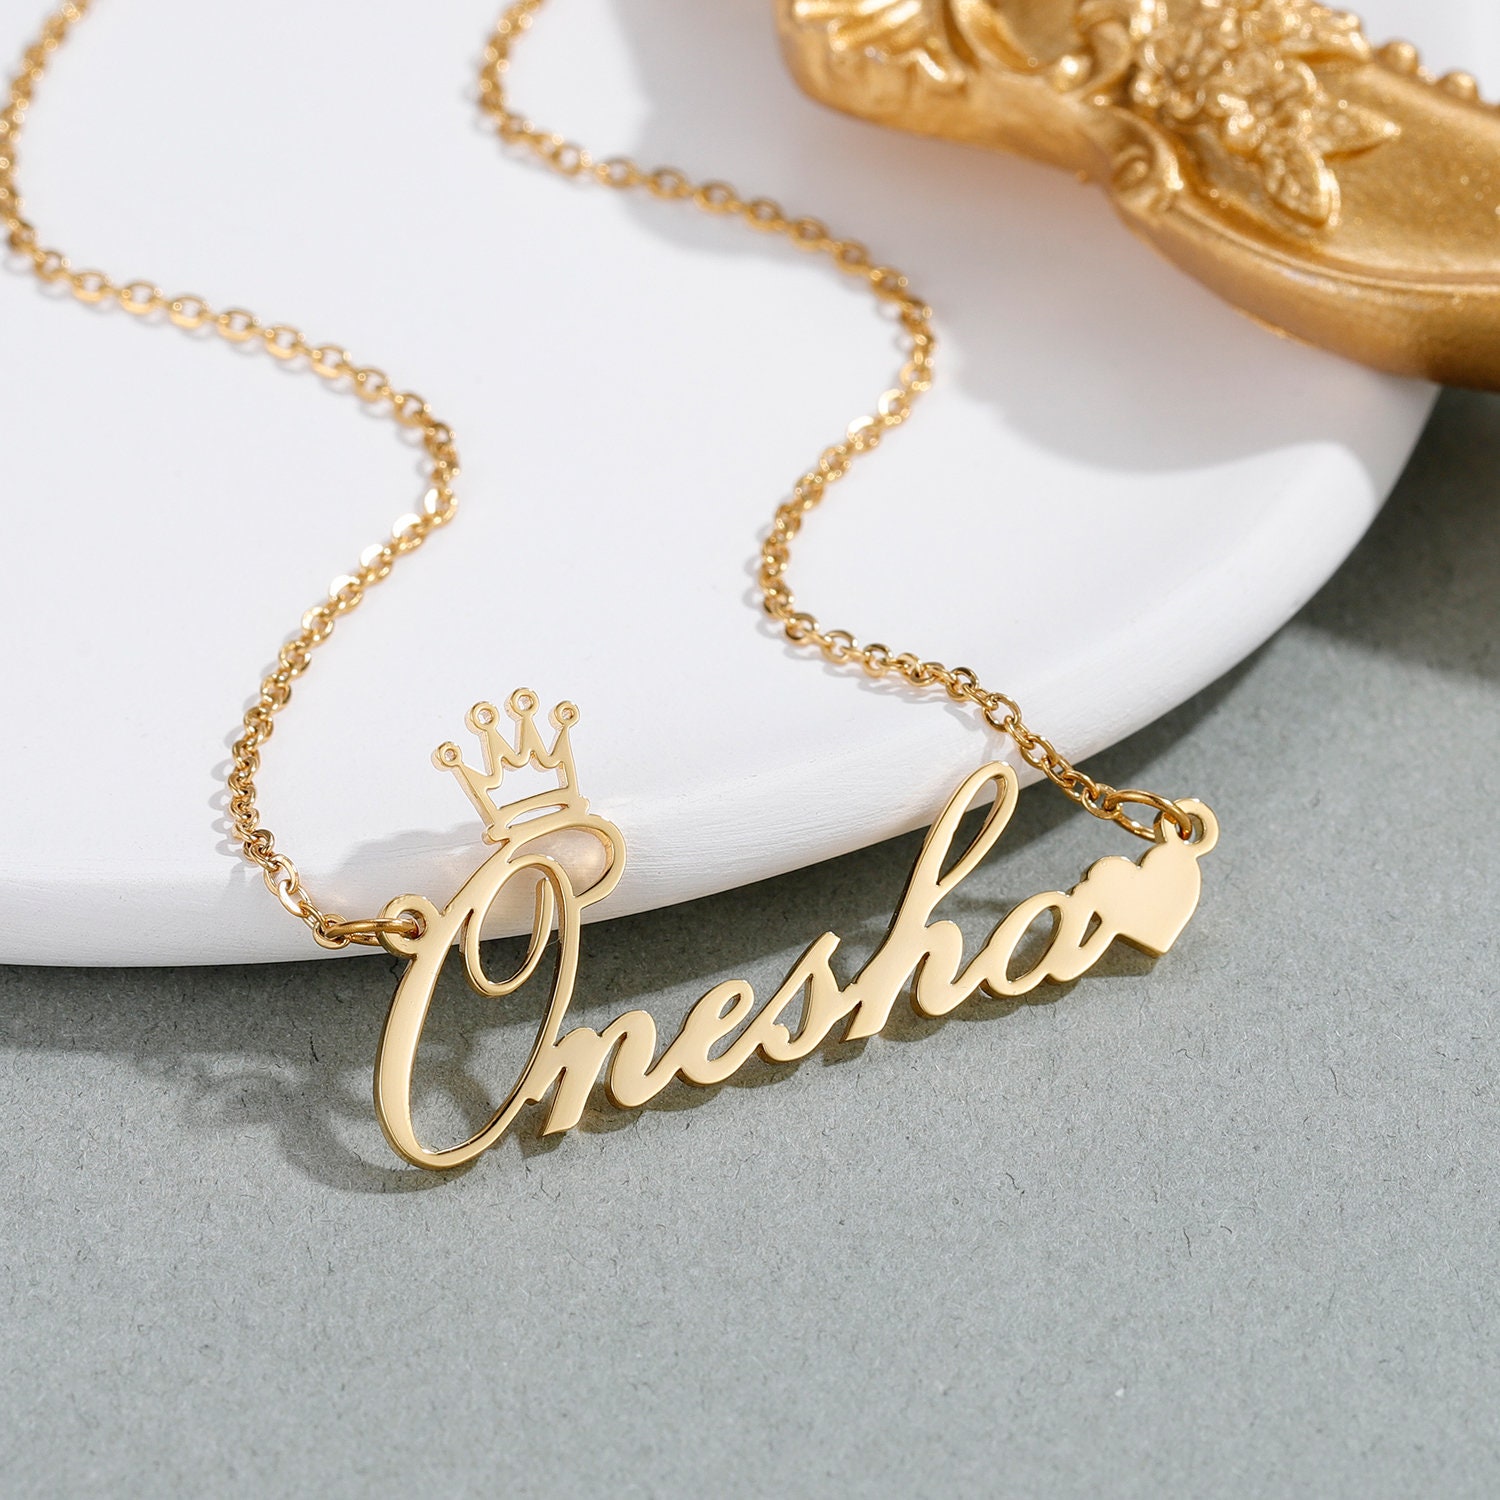 DemiJewelry Custom Name Necklace Engraved Gold Plated Personalized Sterling Silver Heart Crown Pendant Gift for Women Girls